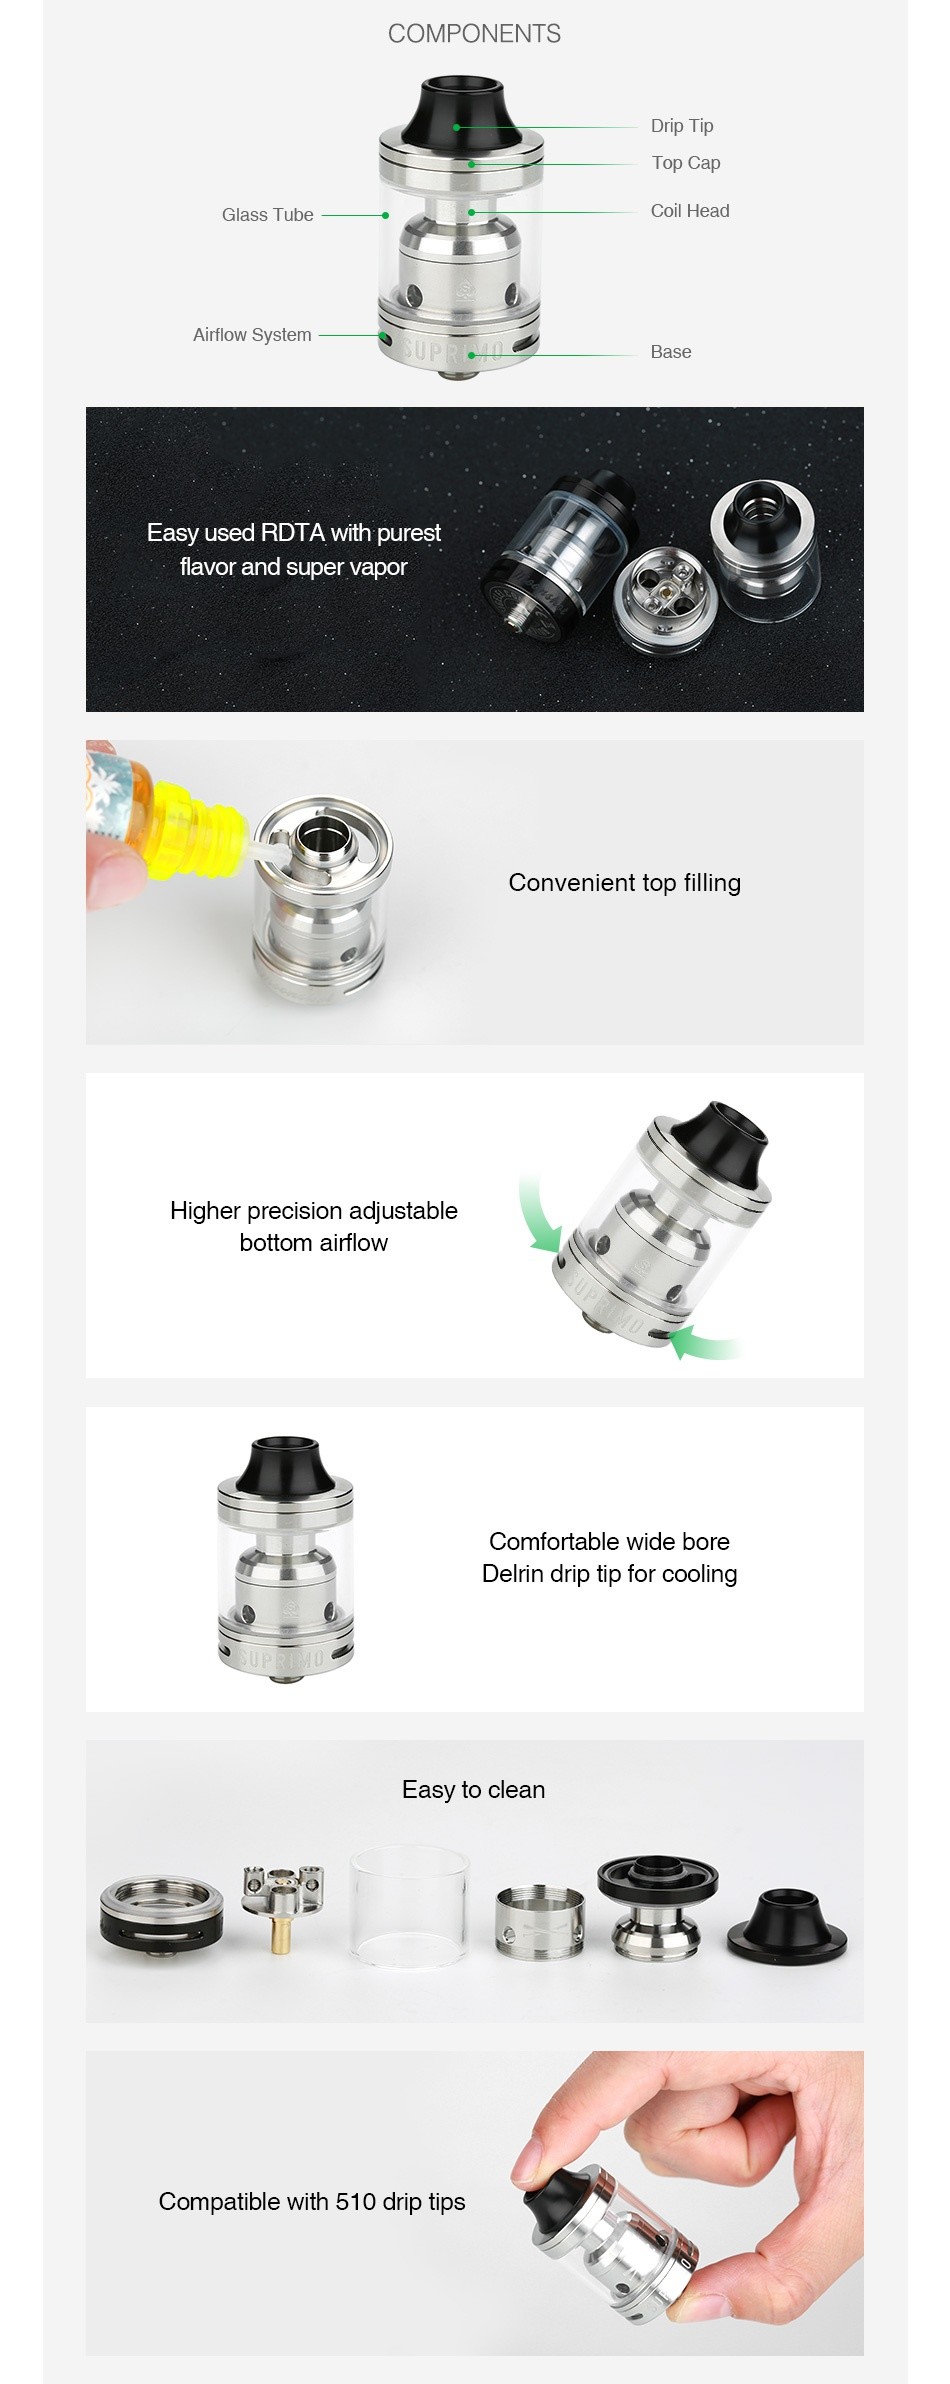 Sigelei Moonshot RTA 2ml/3ml COMPONENTS op cap Glass Tube Coil Head Airflow System Base Easy used RDTA with pures flavor and super vapor Convenient top filling Higher precision adjustable bottom airflow Comfortable wide b Delrin drip tip for cooling Easy to clean Compatible with 510 drip tips